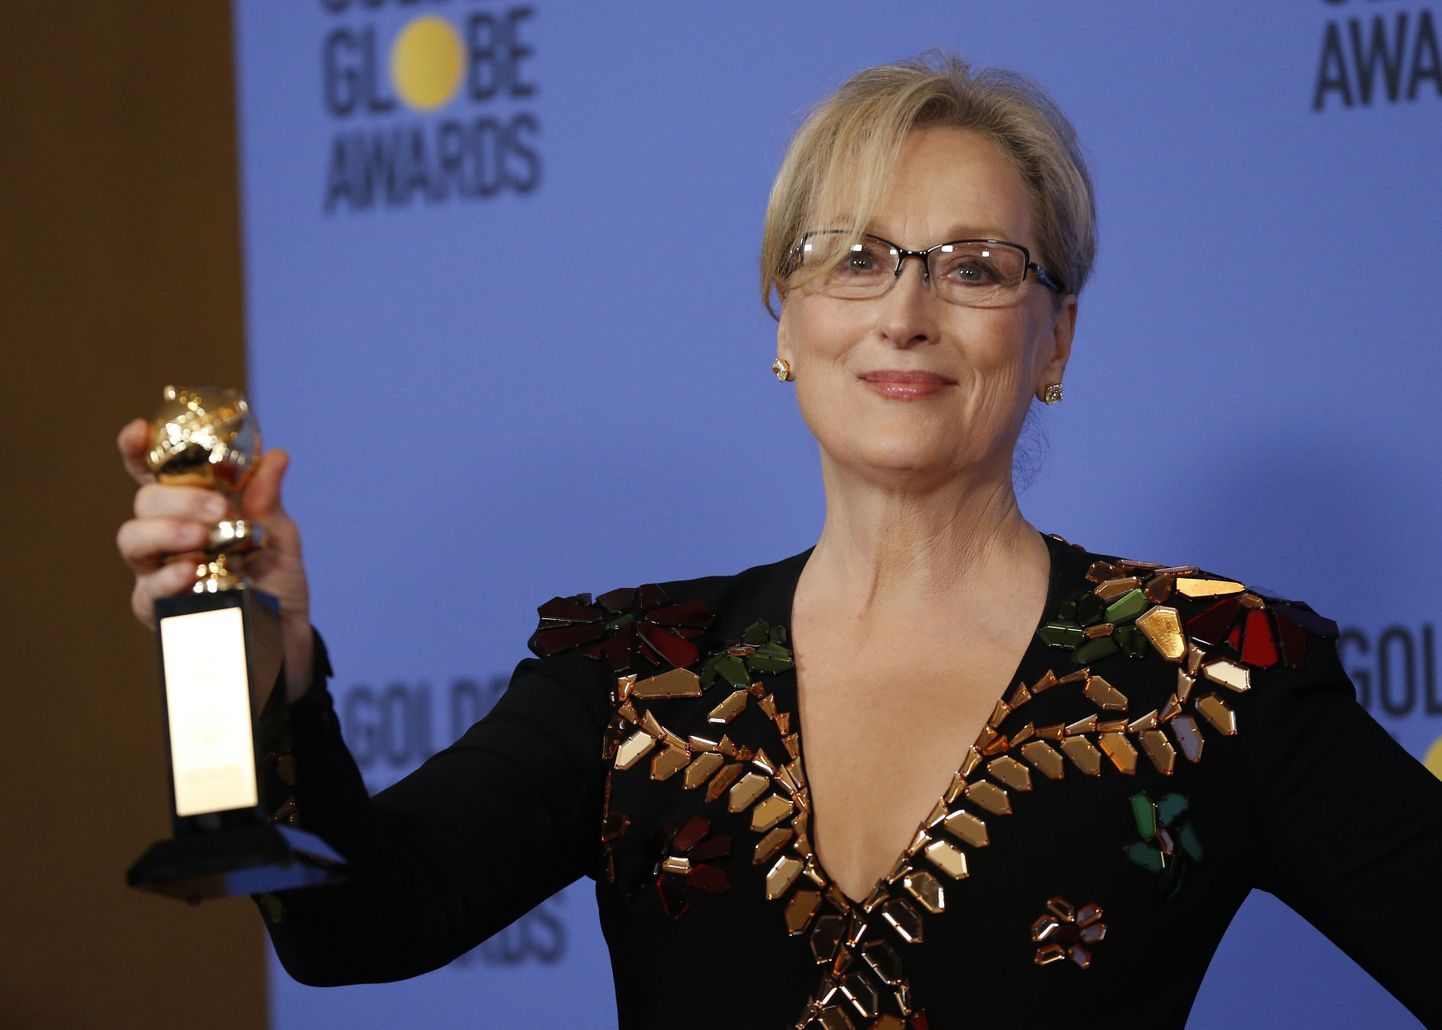 Meryl Streep holds the Cecil B. DeMille Award during the 74th Annual Golden Globe Awards in Beverly Hills, California, U.S., January 8, 2017.  REUTERS/Mario Anzuoni